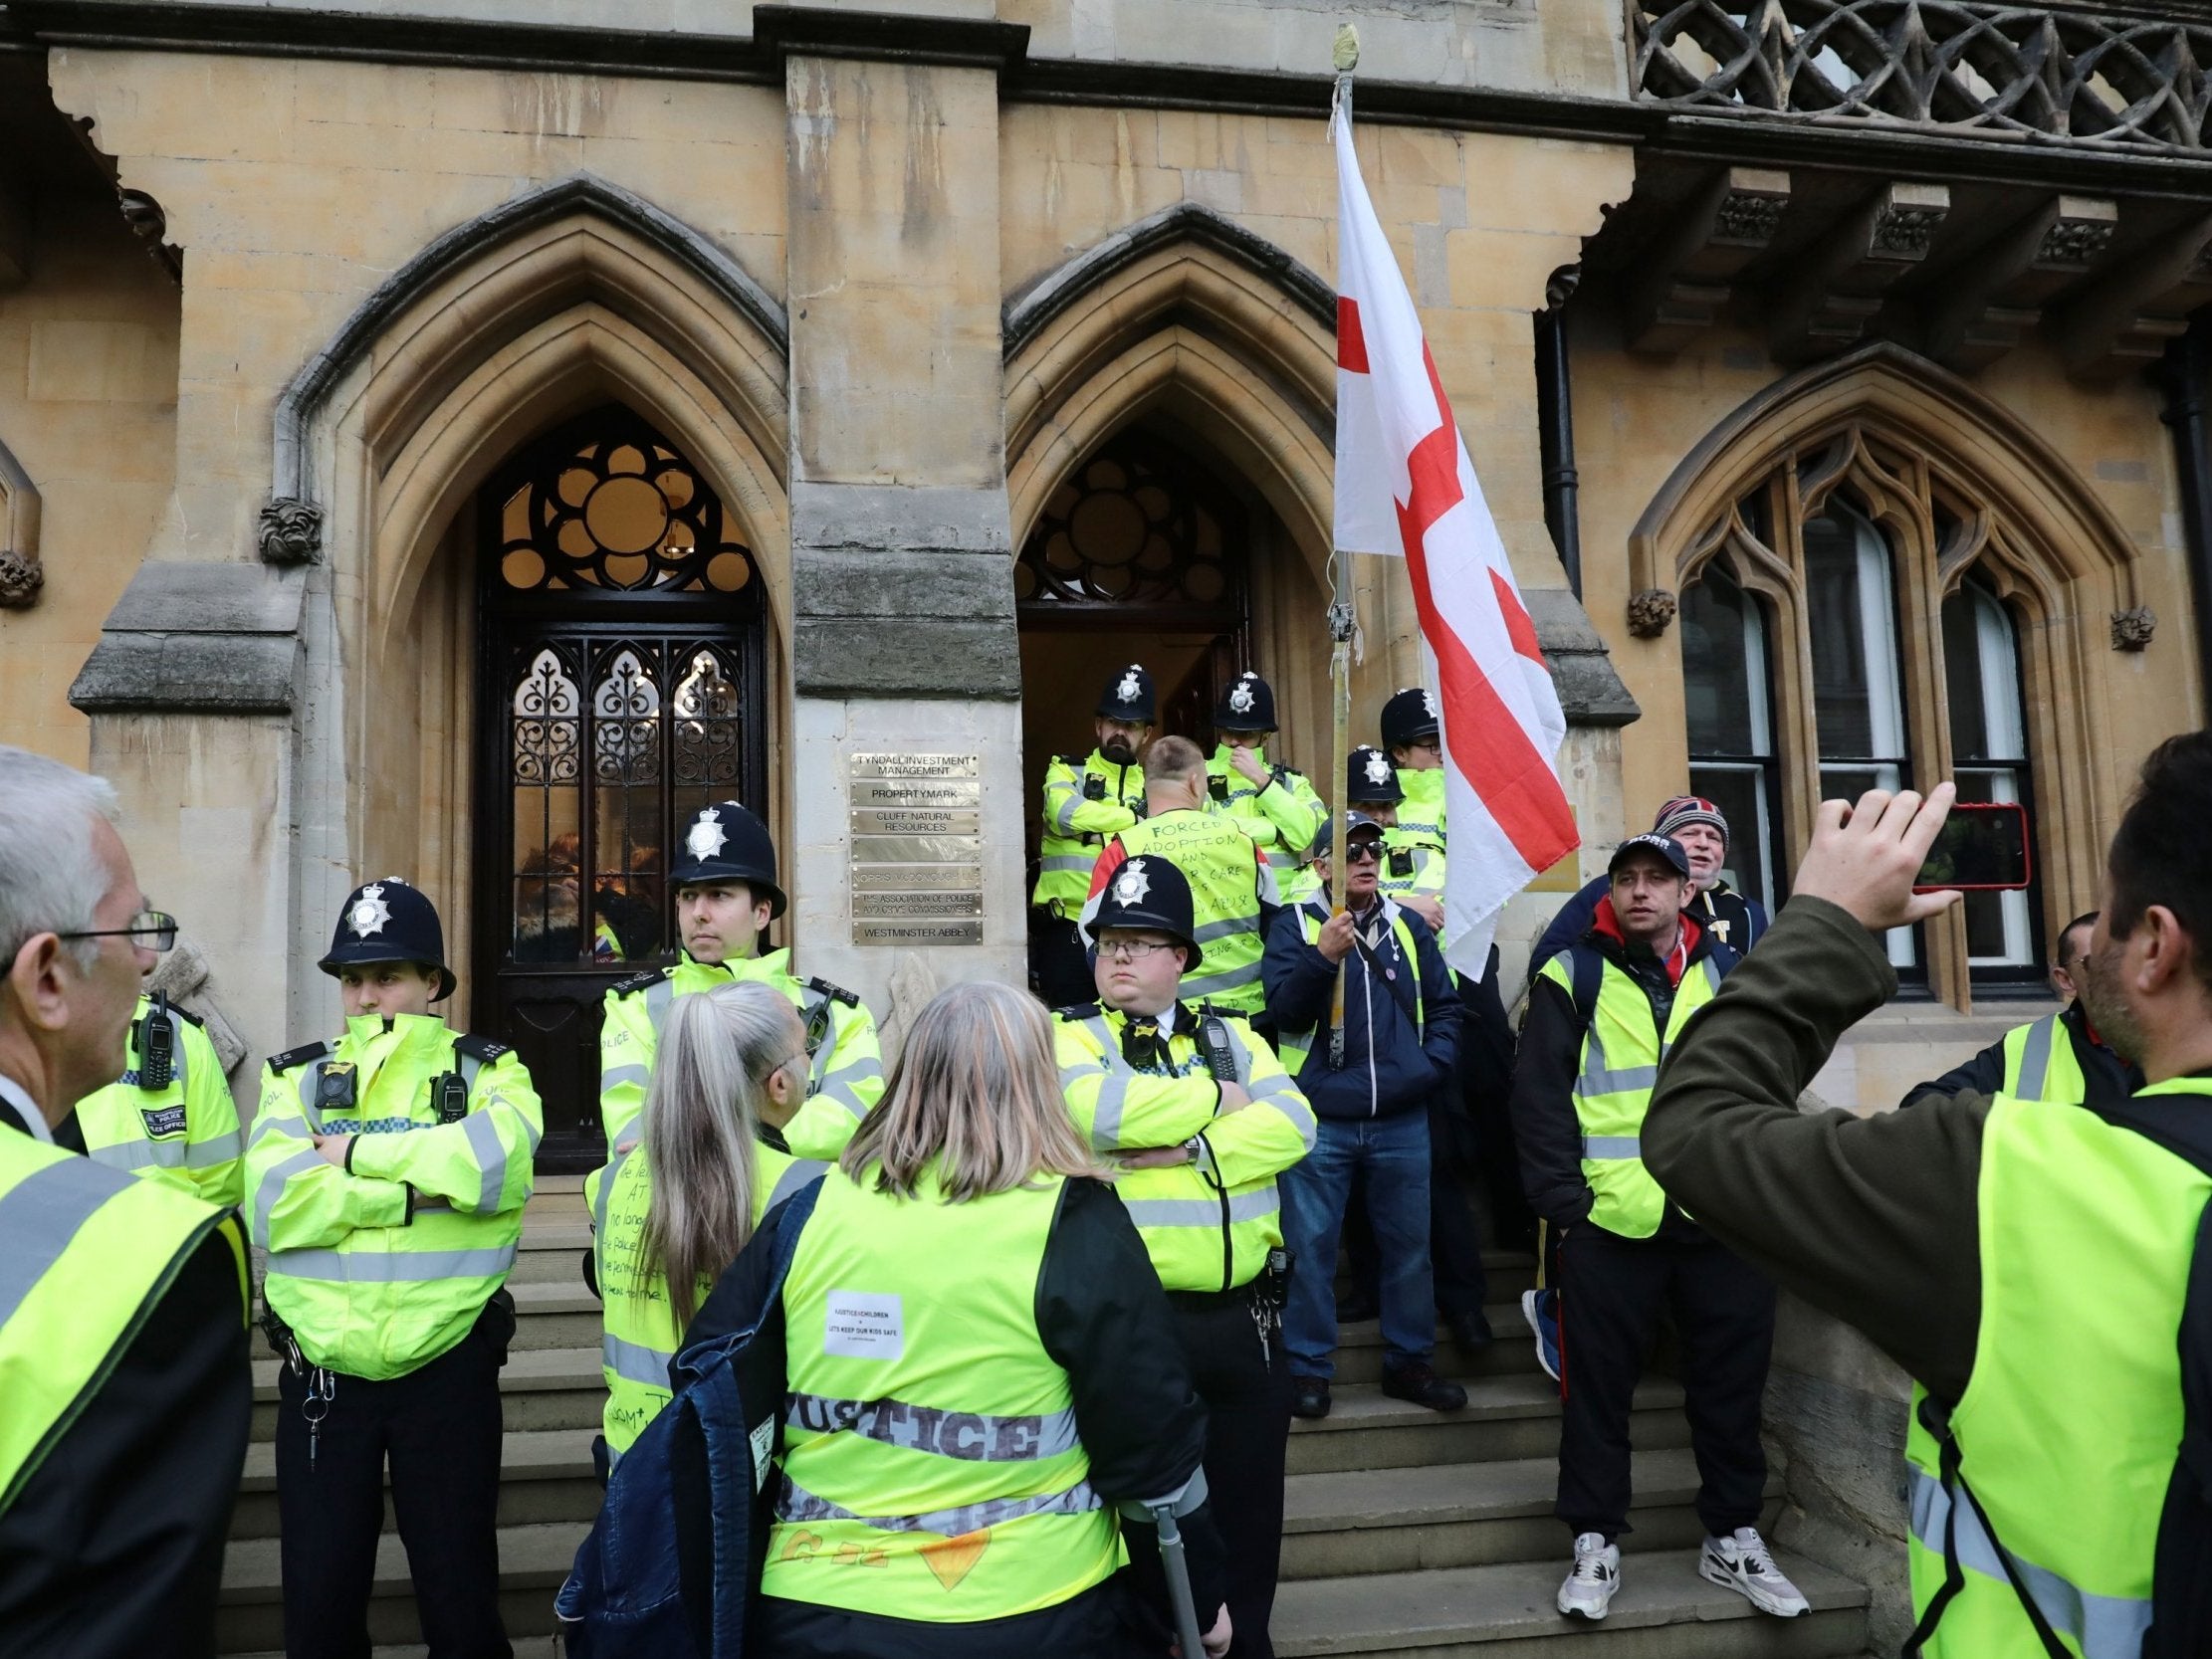 The incident (not pictured) came at a weekly 'yellow vest' demonstration in London